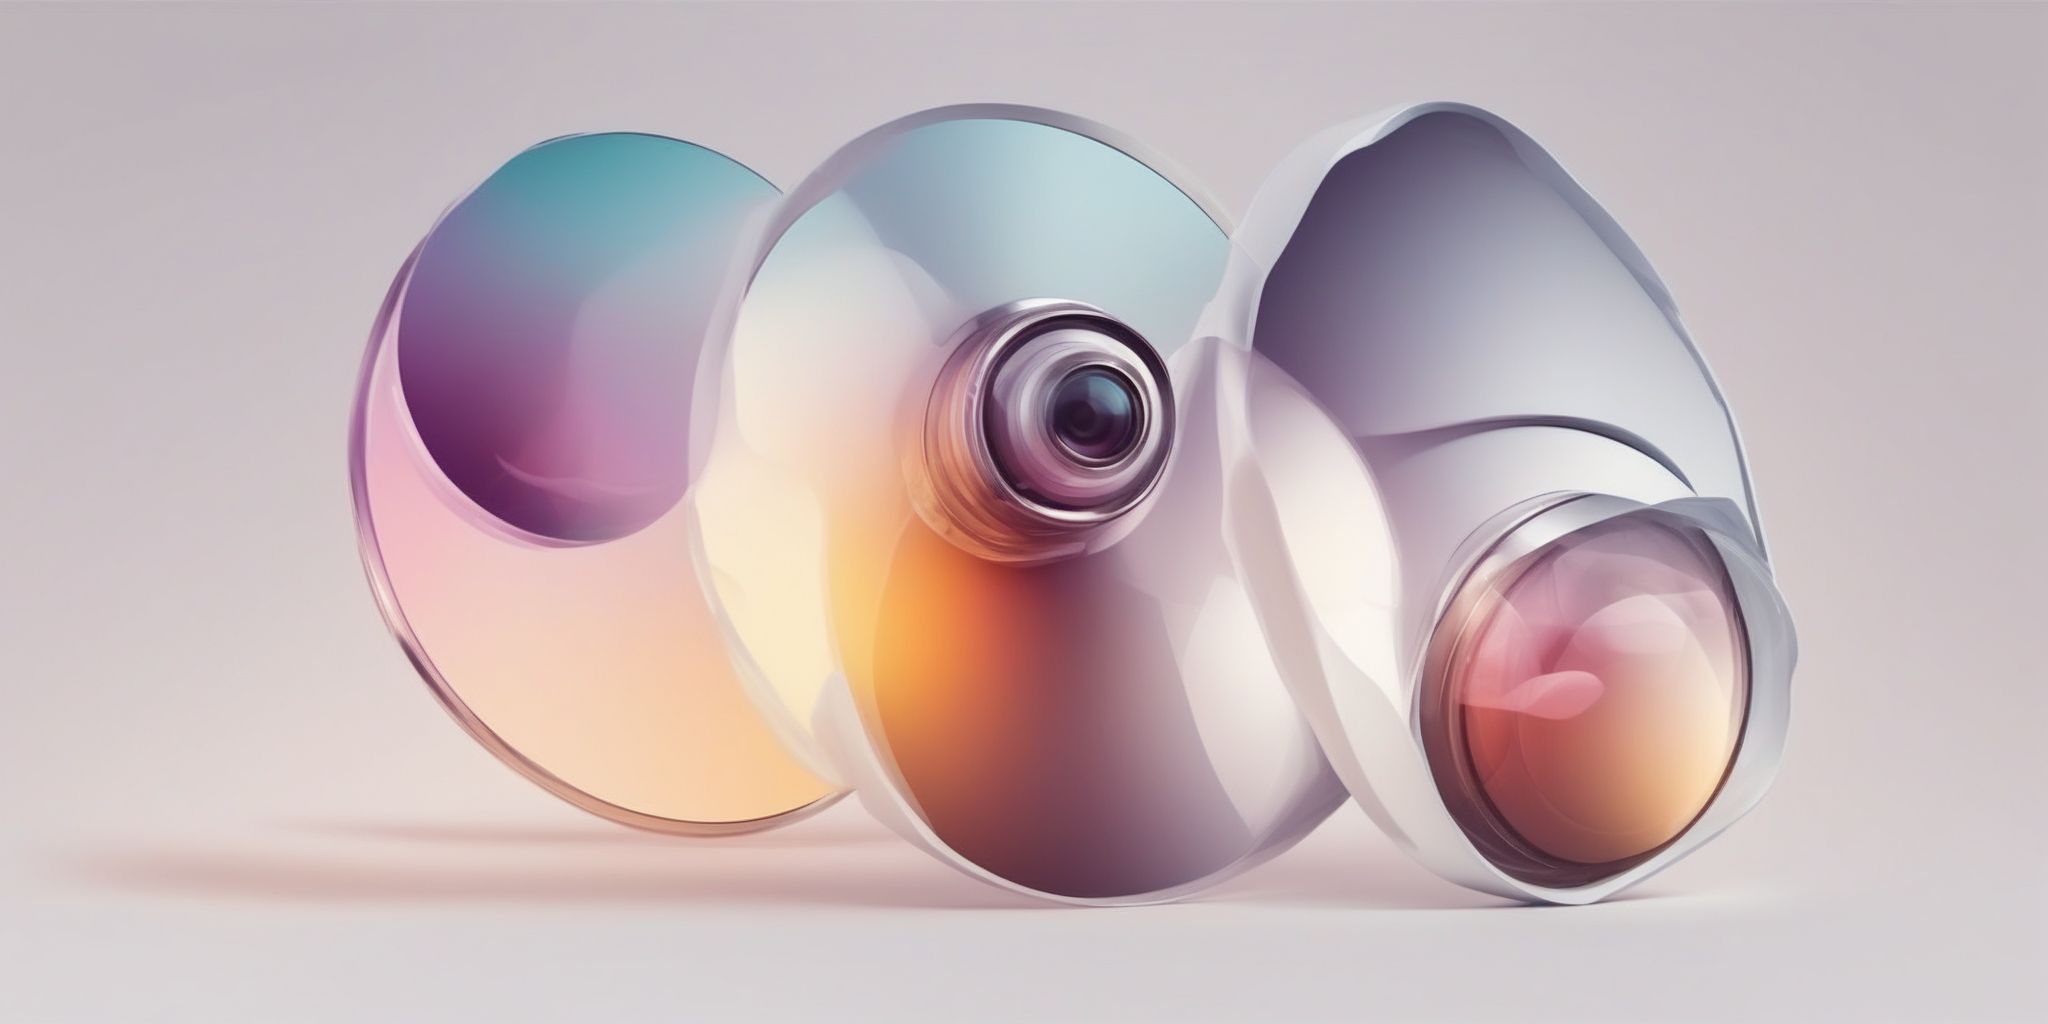 lens in illustration style with gradients and white background